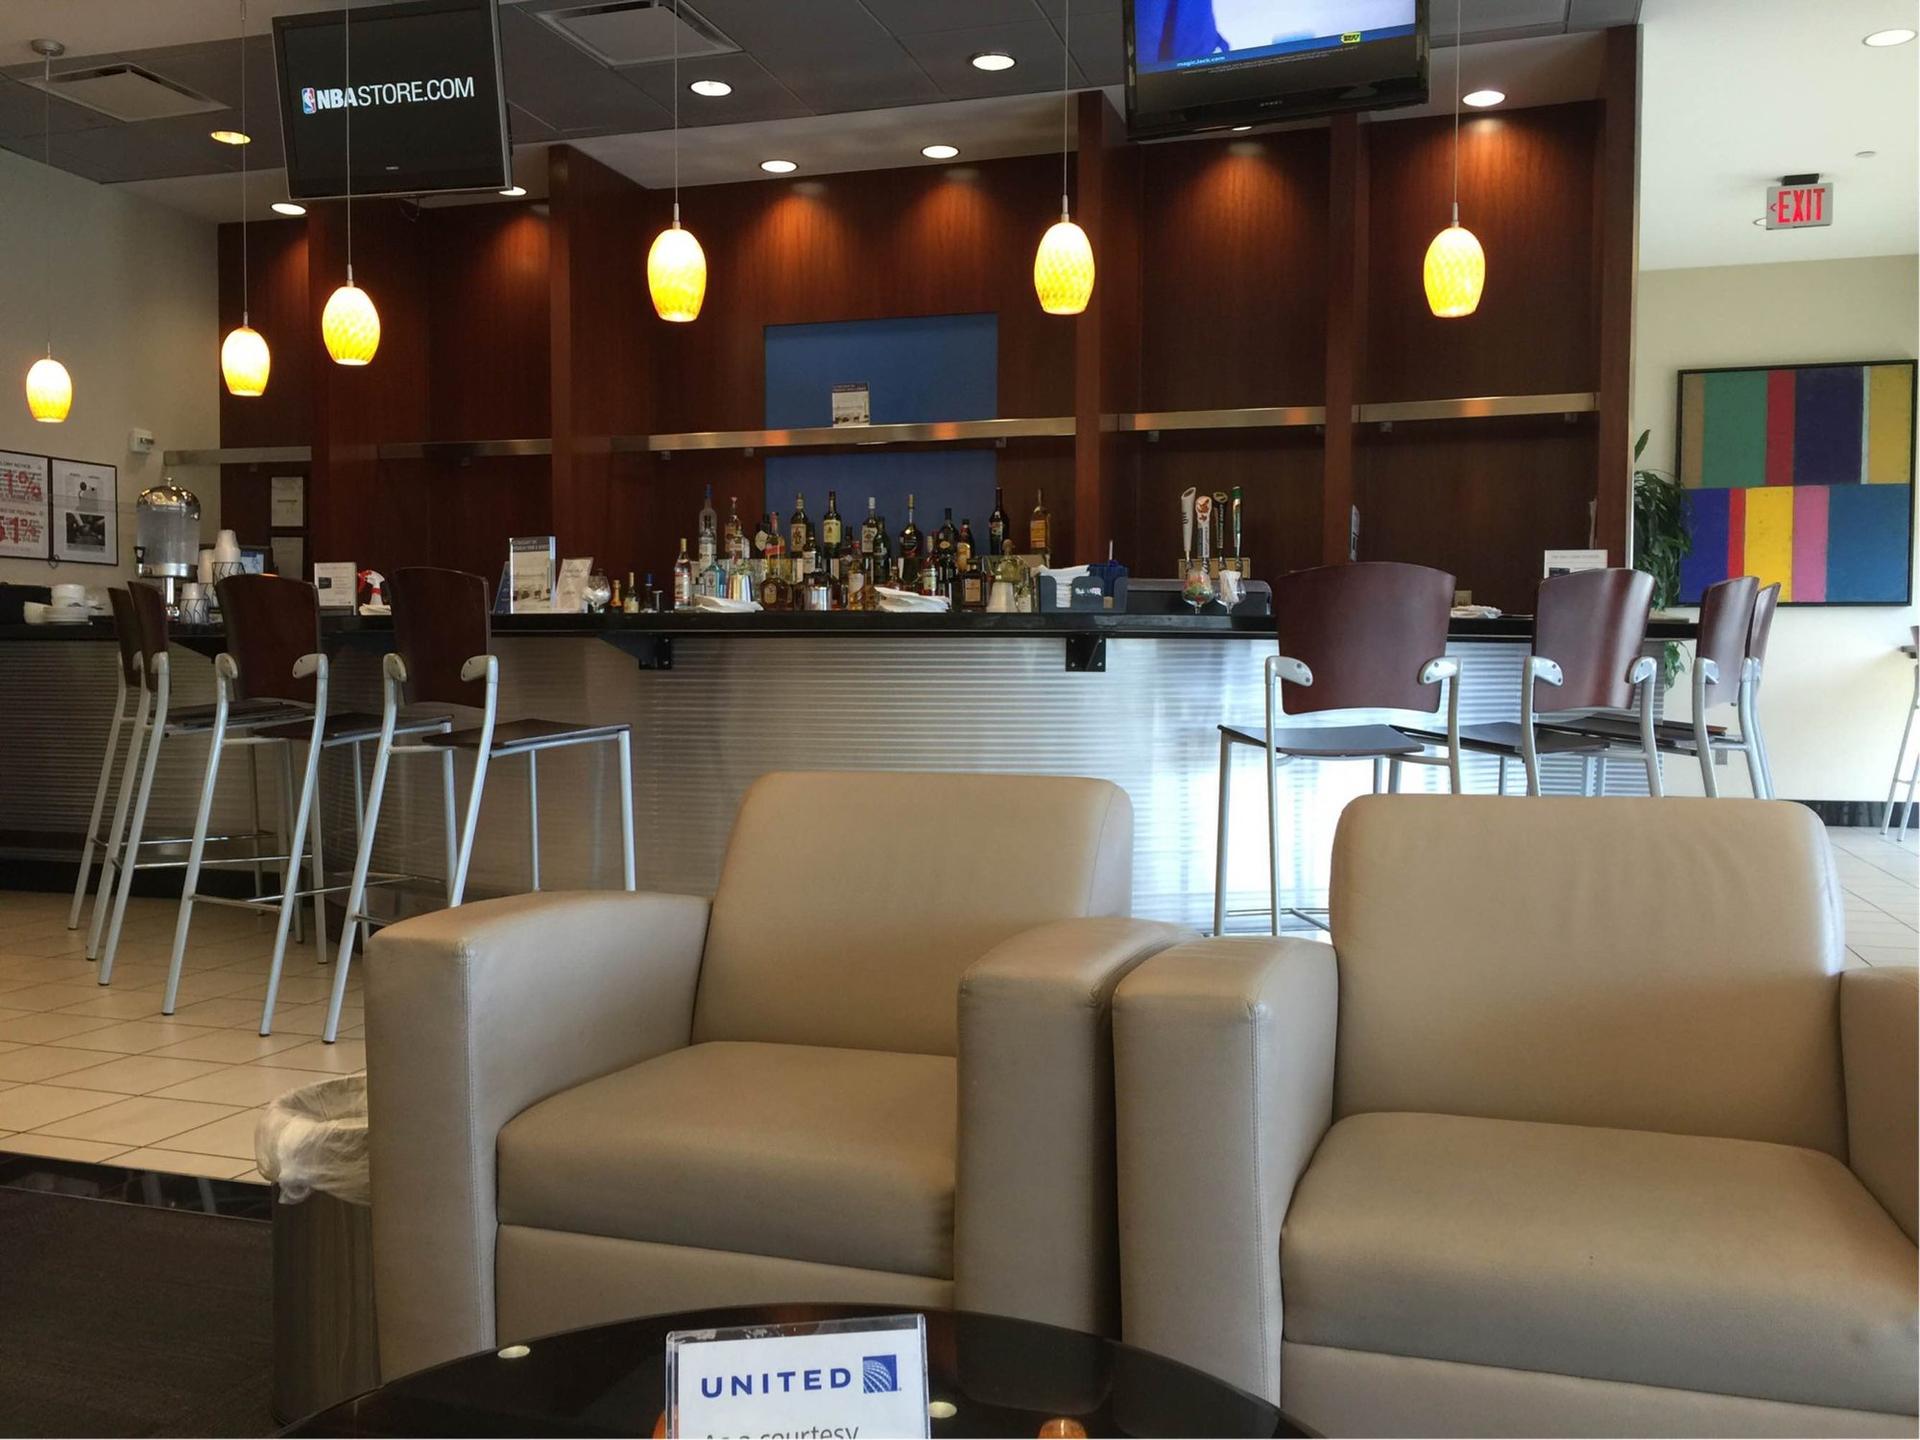 United Airlines United Club image 2 of 3